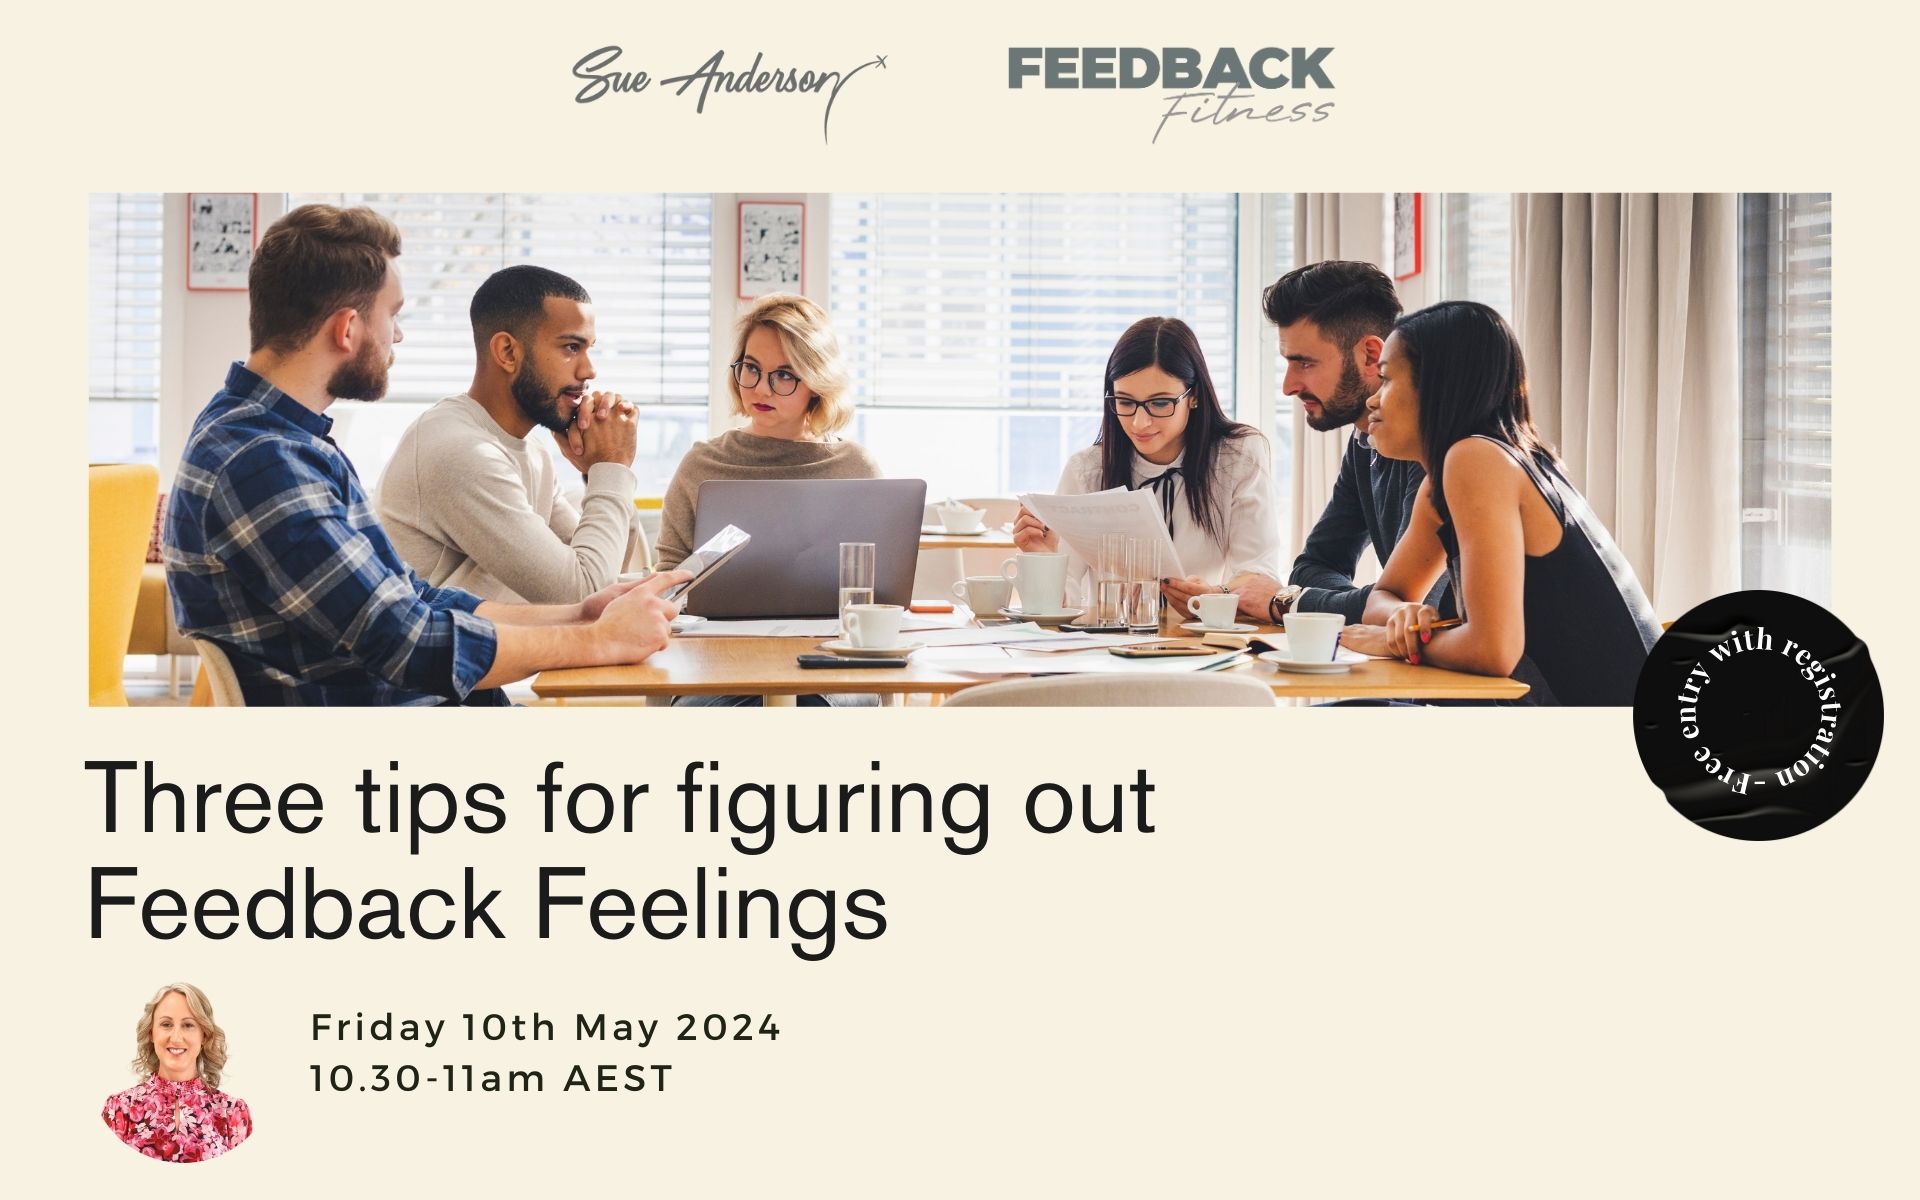 Three tips for figuring out Feedback Feelings